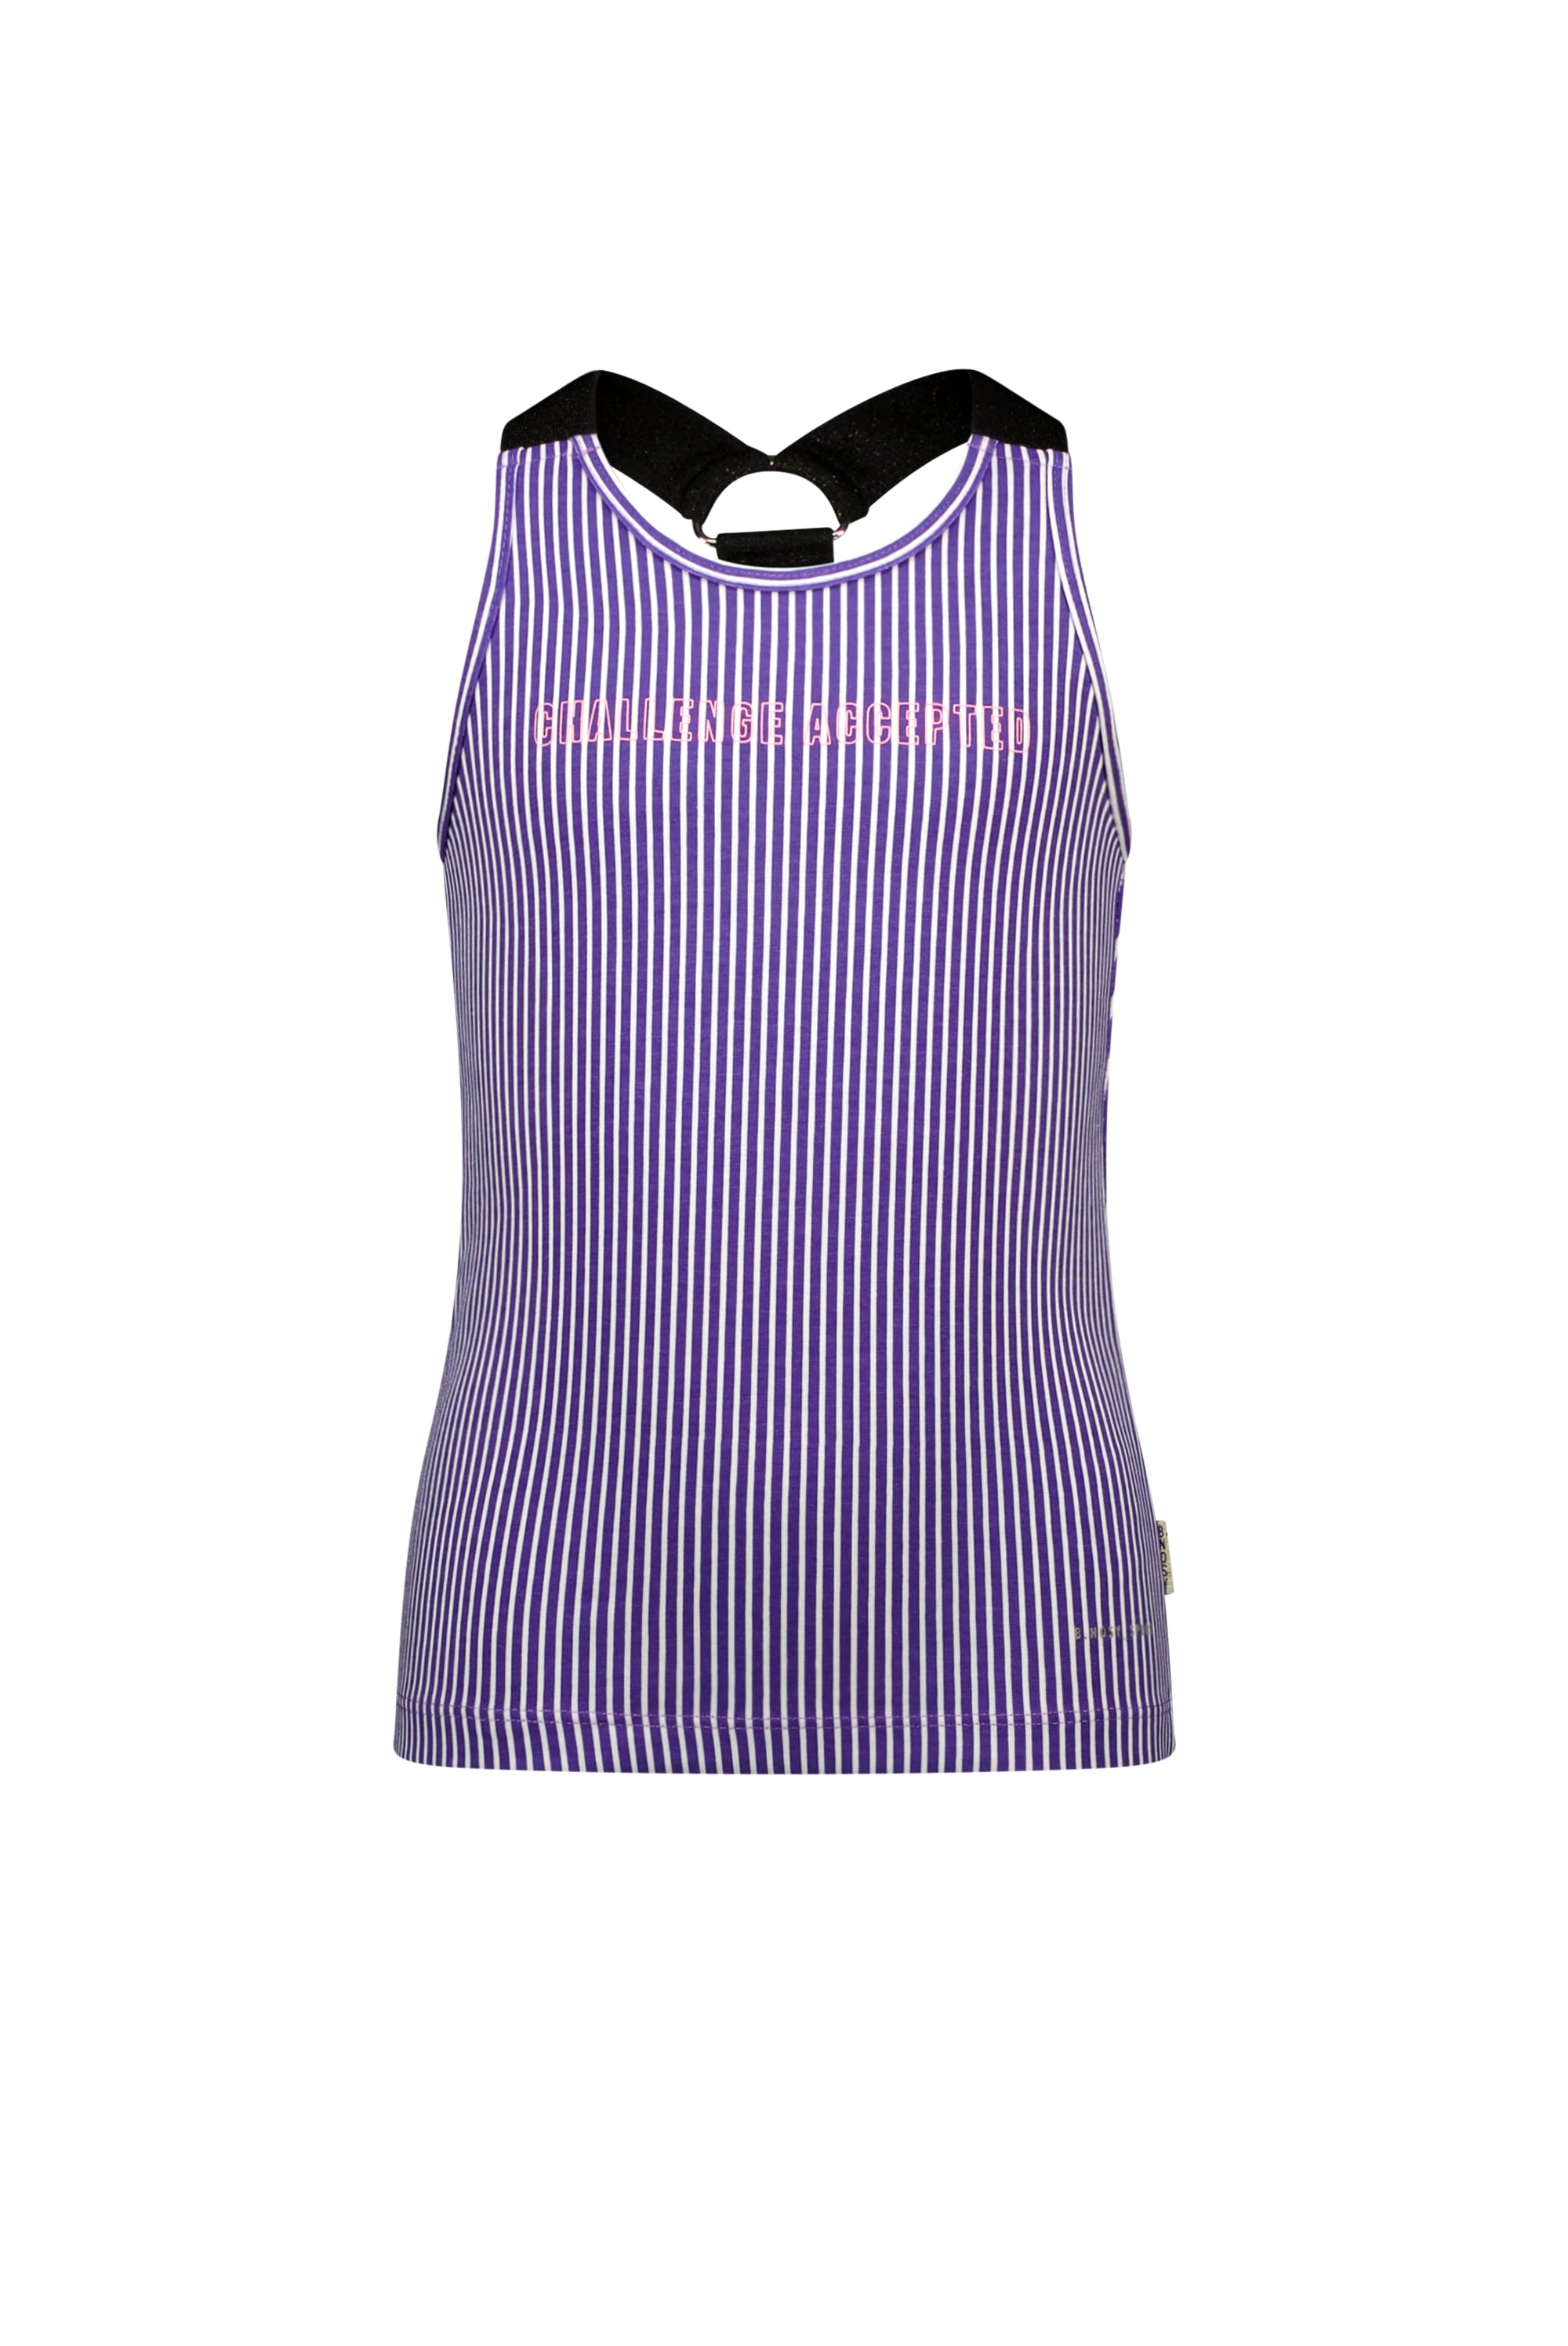 Girls 2-pack tanktop with vertical printed stripes